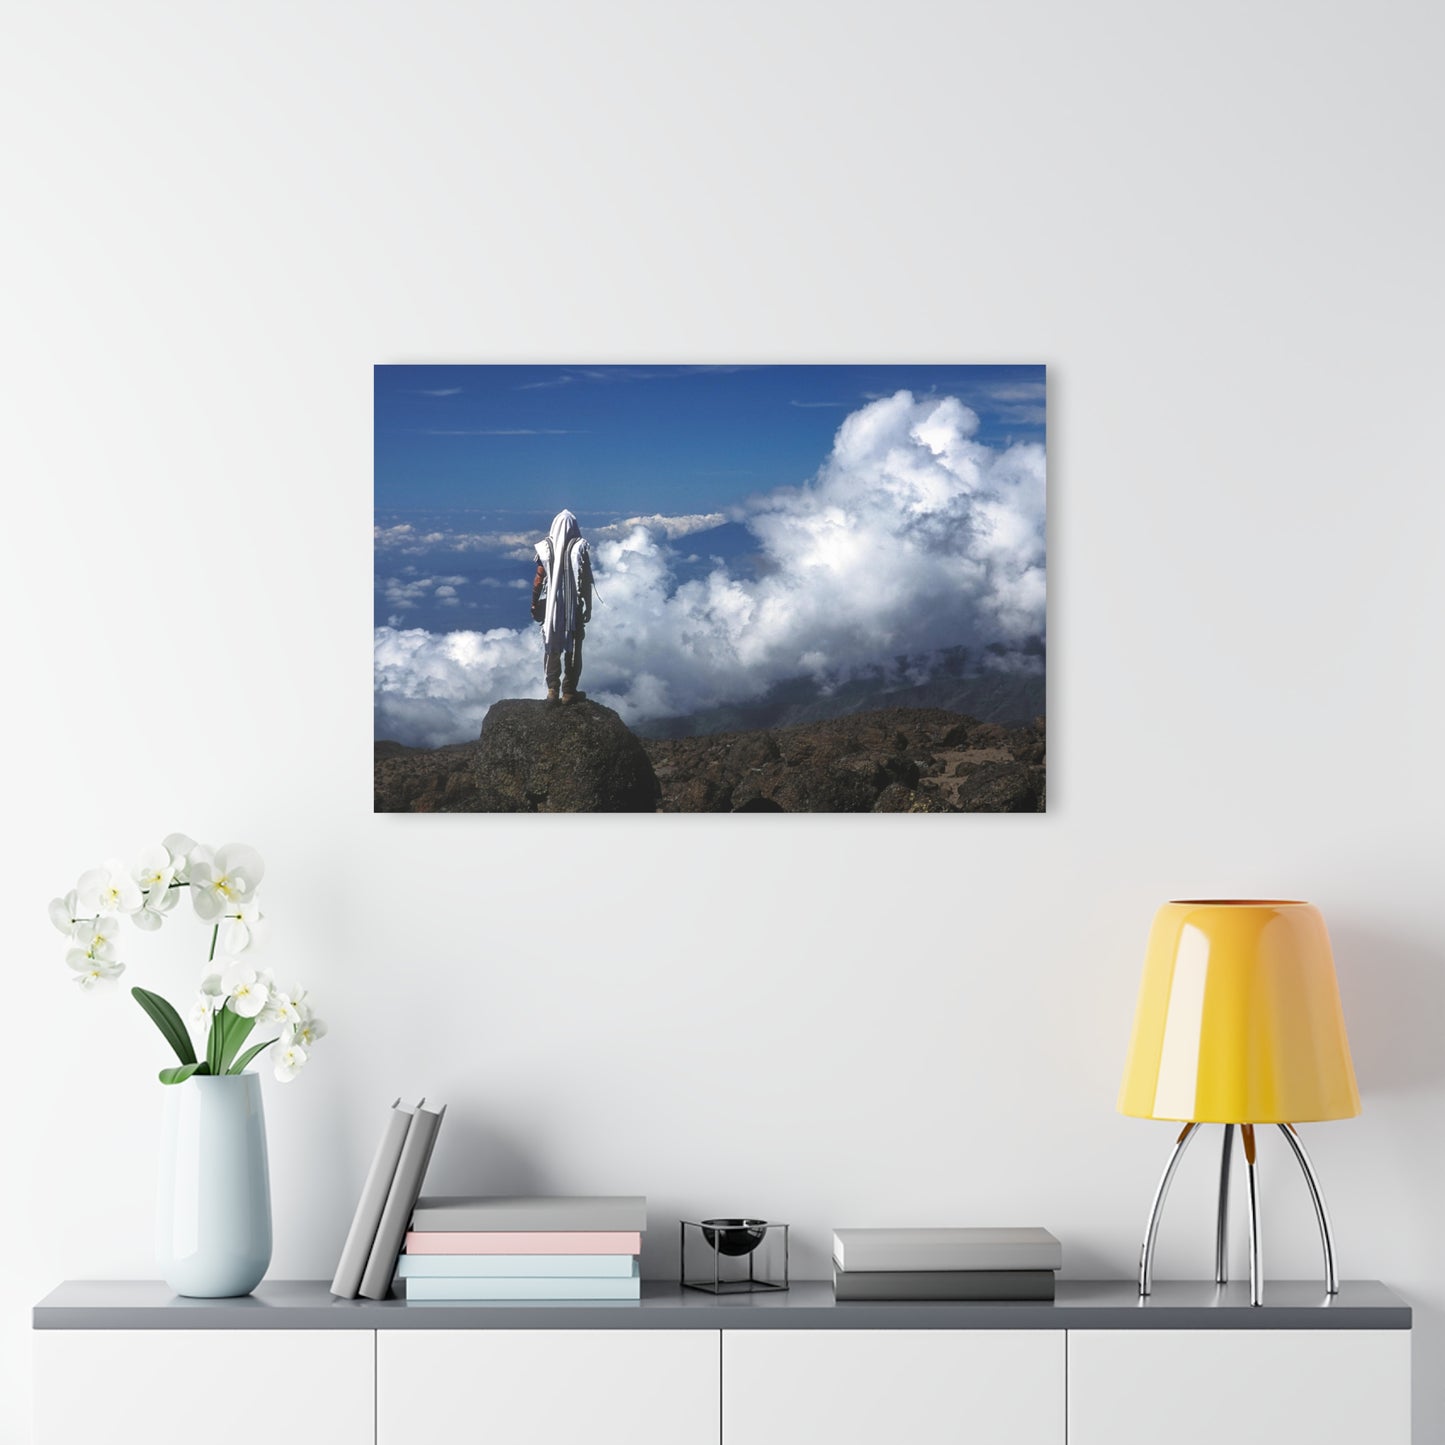 Song of Ascent by Yehoshua Halevi Photograph - Glossy Acrylic Print (French Cleat Hanging)